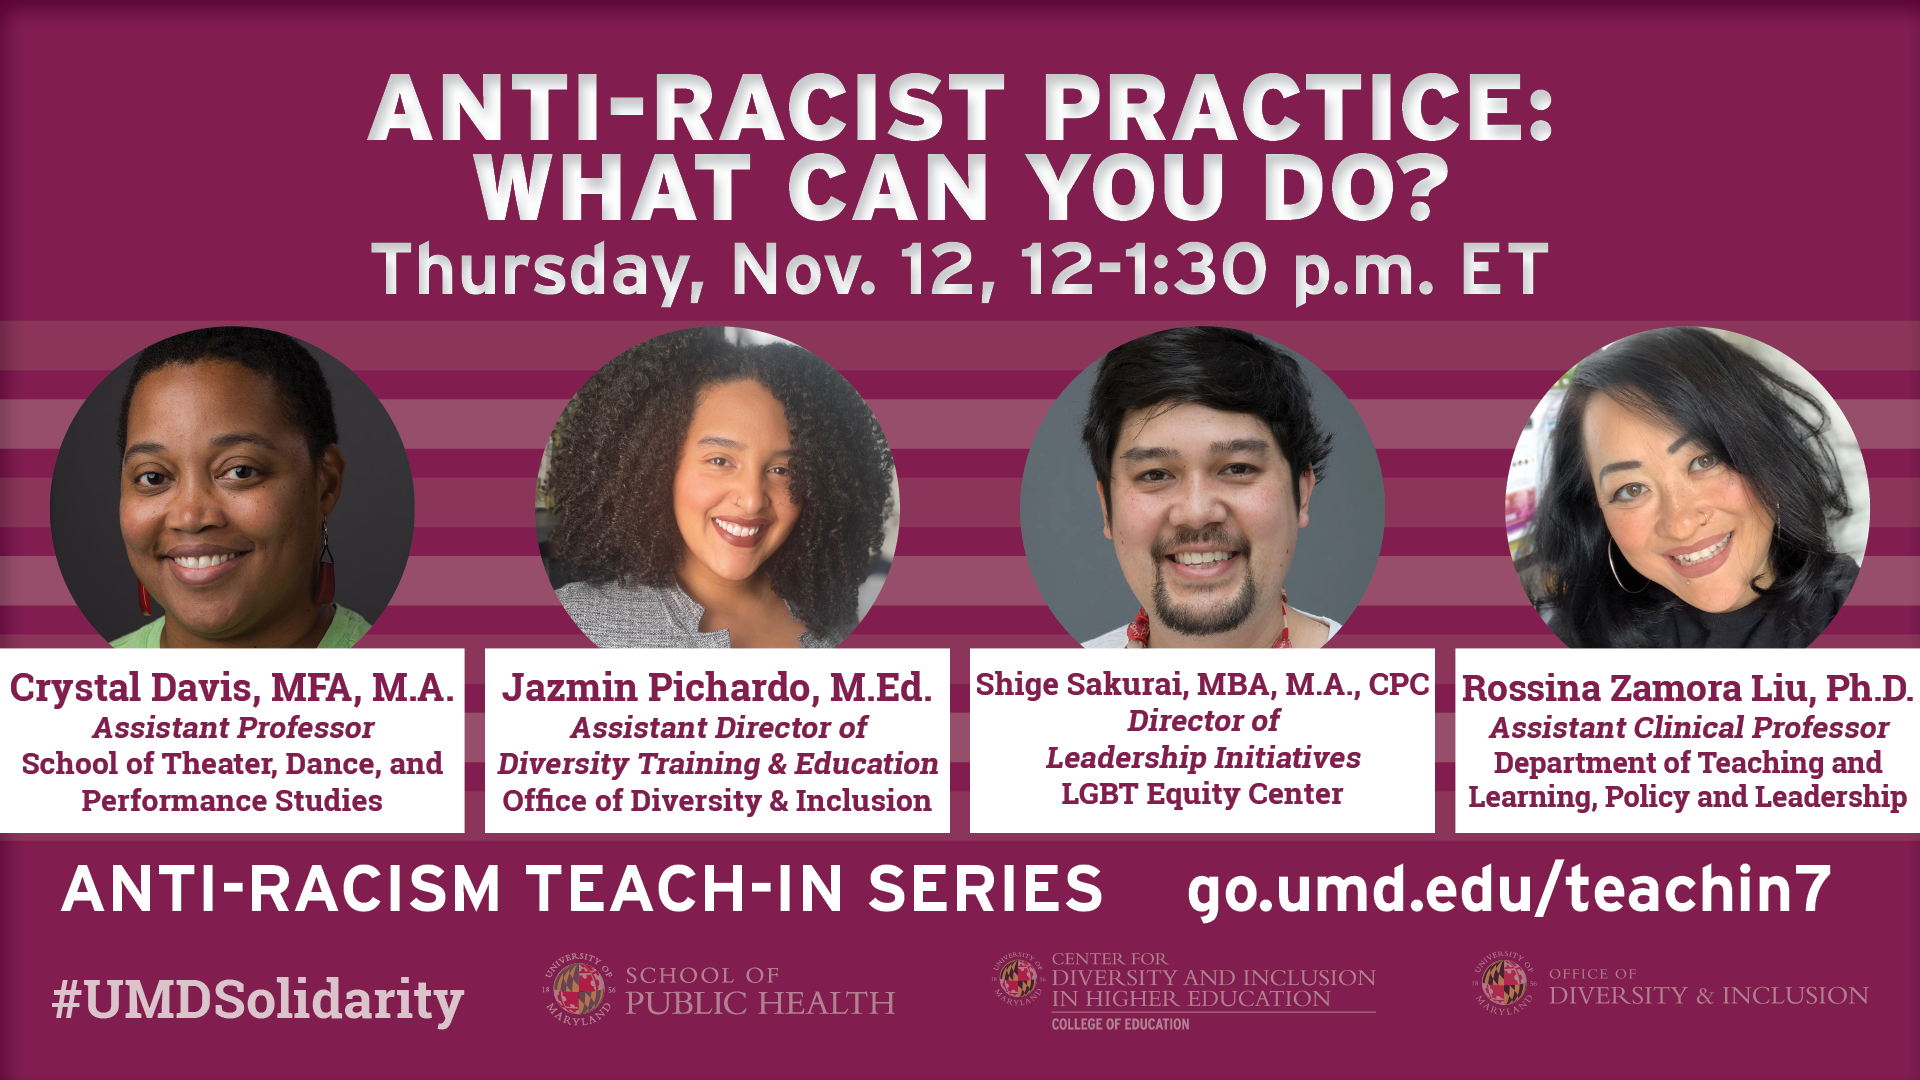 Anti-Racism practice event flyer with portraits of the speakers